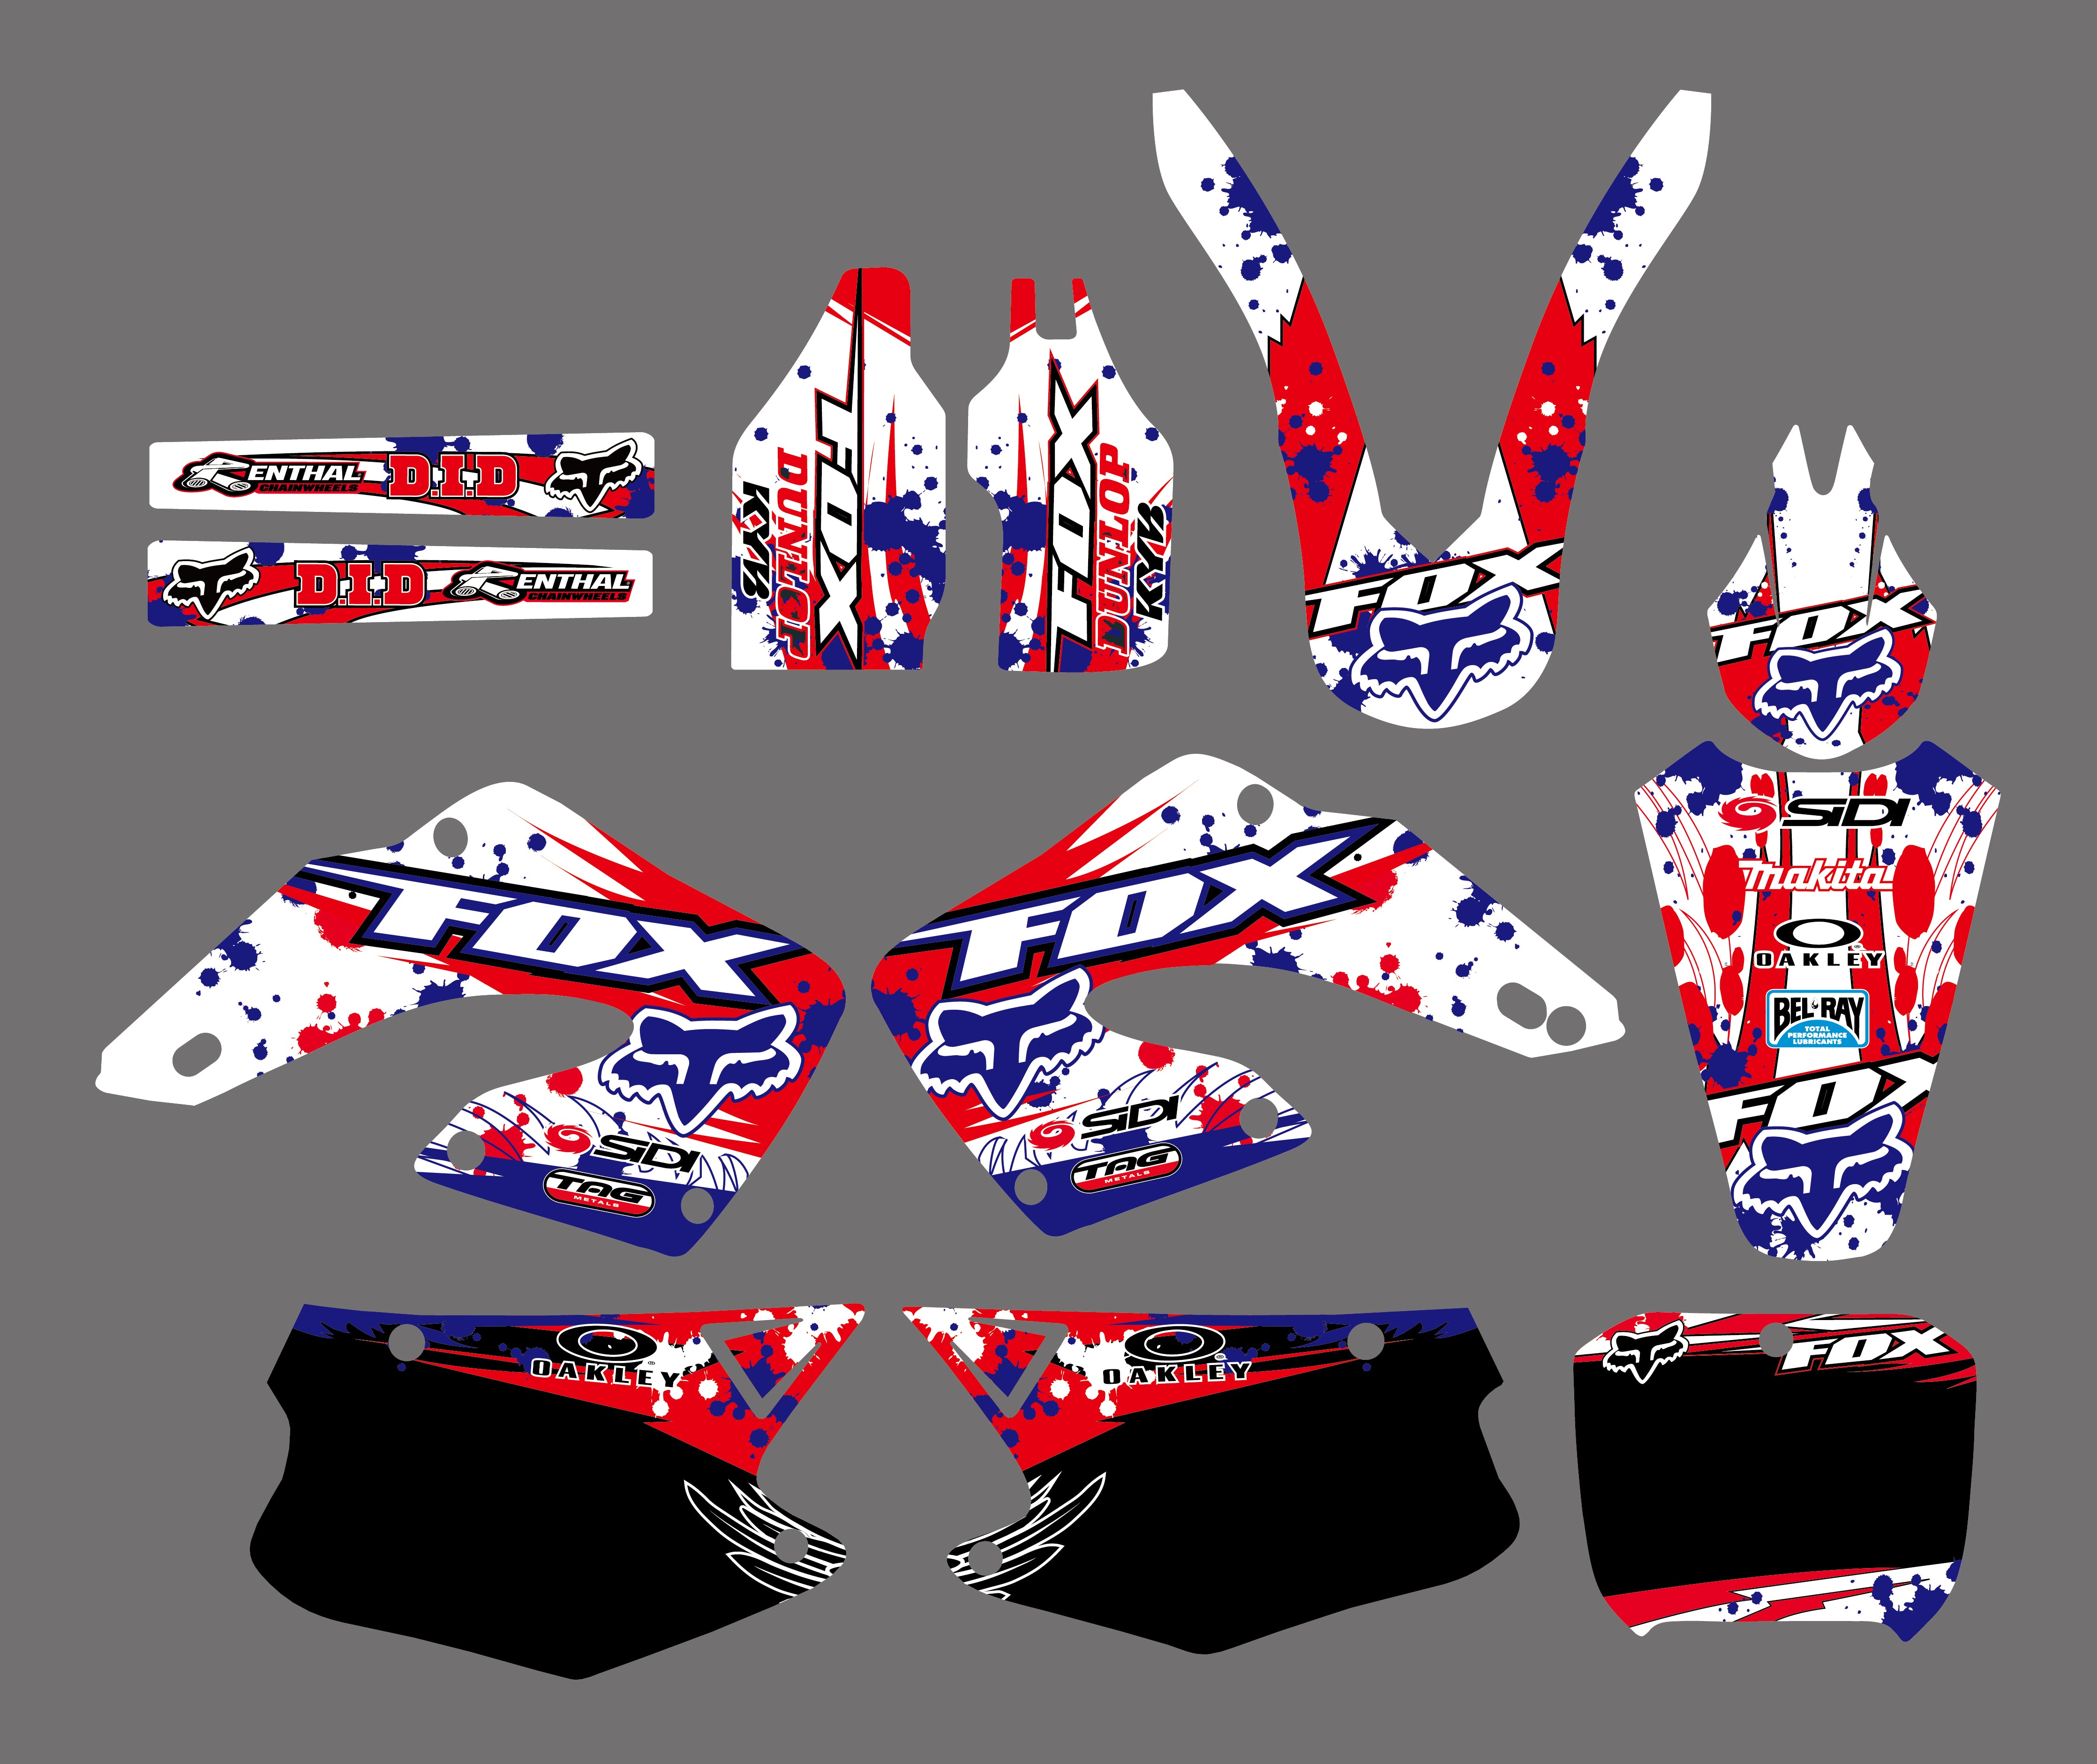 Team Graphics Backgrounds Decals Kit For Honda CR125/CR250 2000-2001